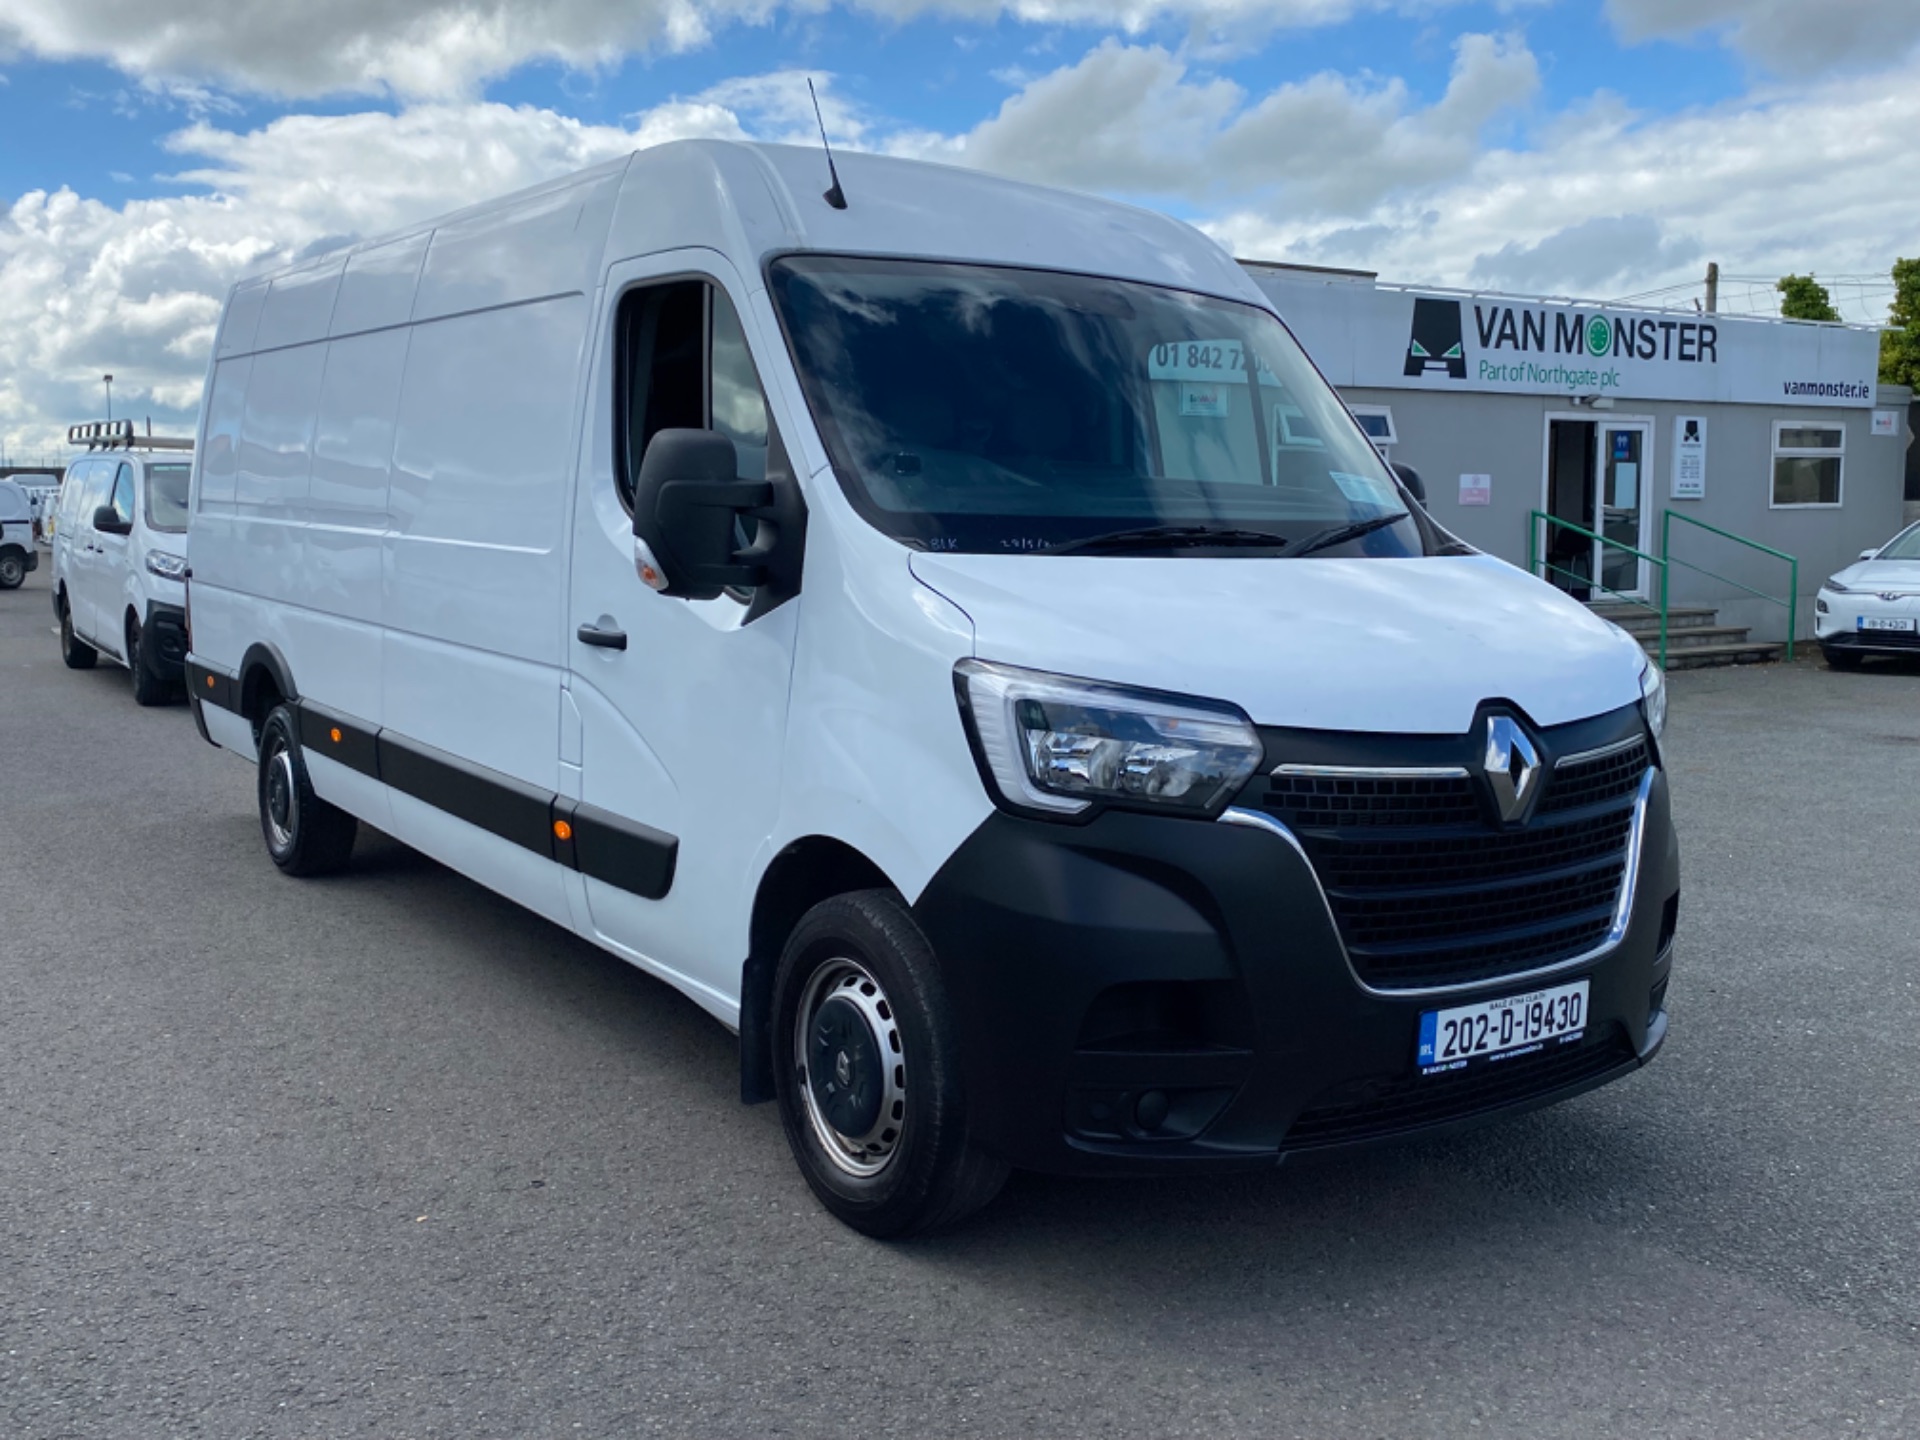 2020 Renault Master RWD LML35 DCI 130 Business MY1 (202D19430)